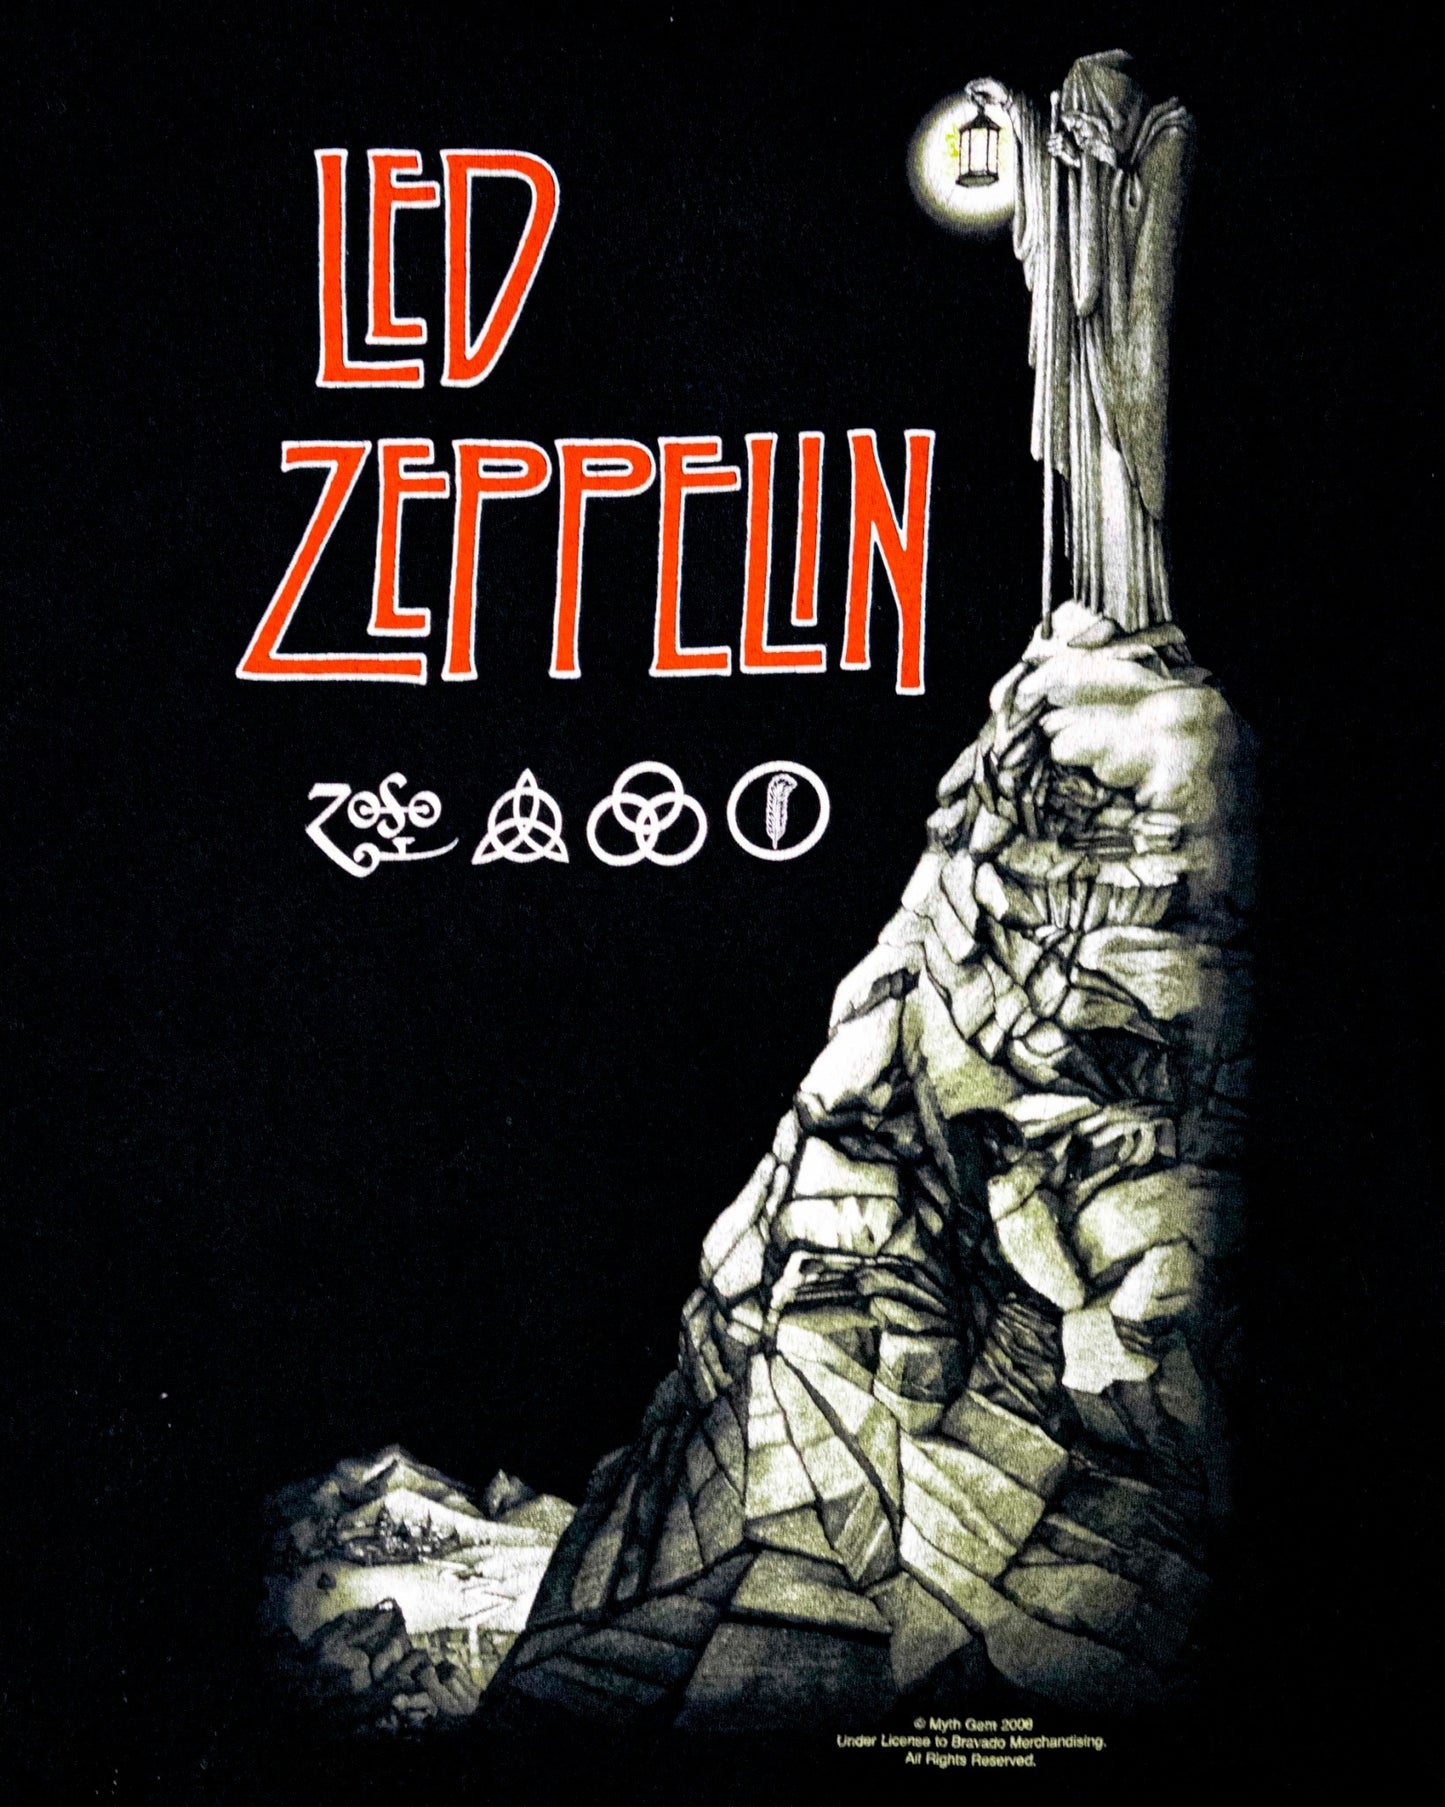 "LED ZEPPELIN" Magician on cliff